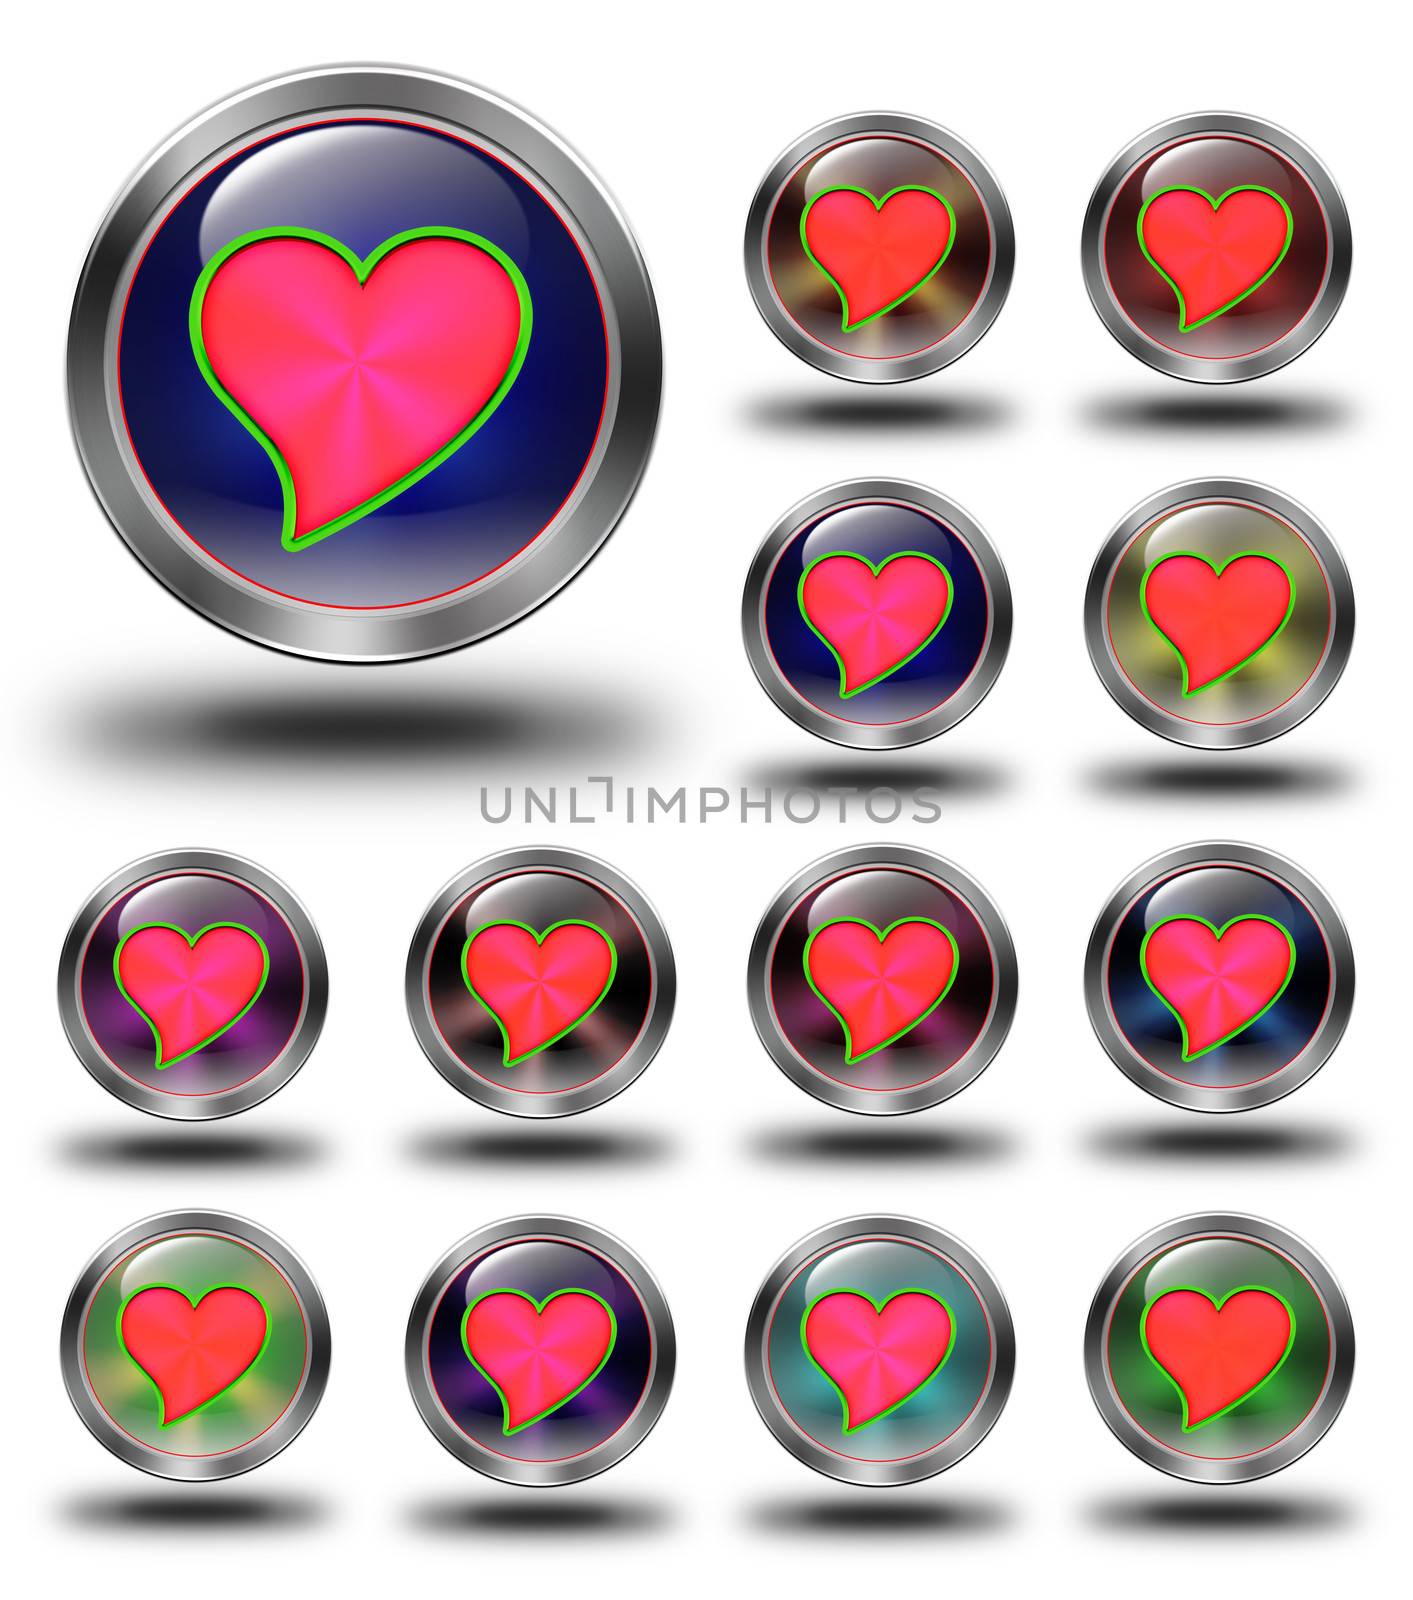 Red heart glossy icons, crazy colors by konradkerker